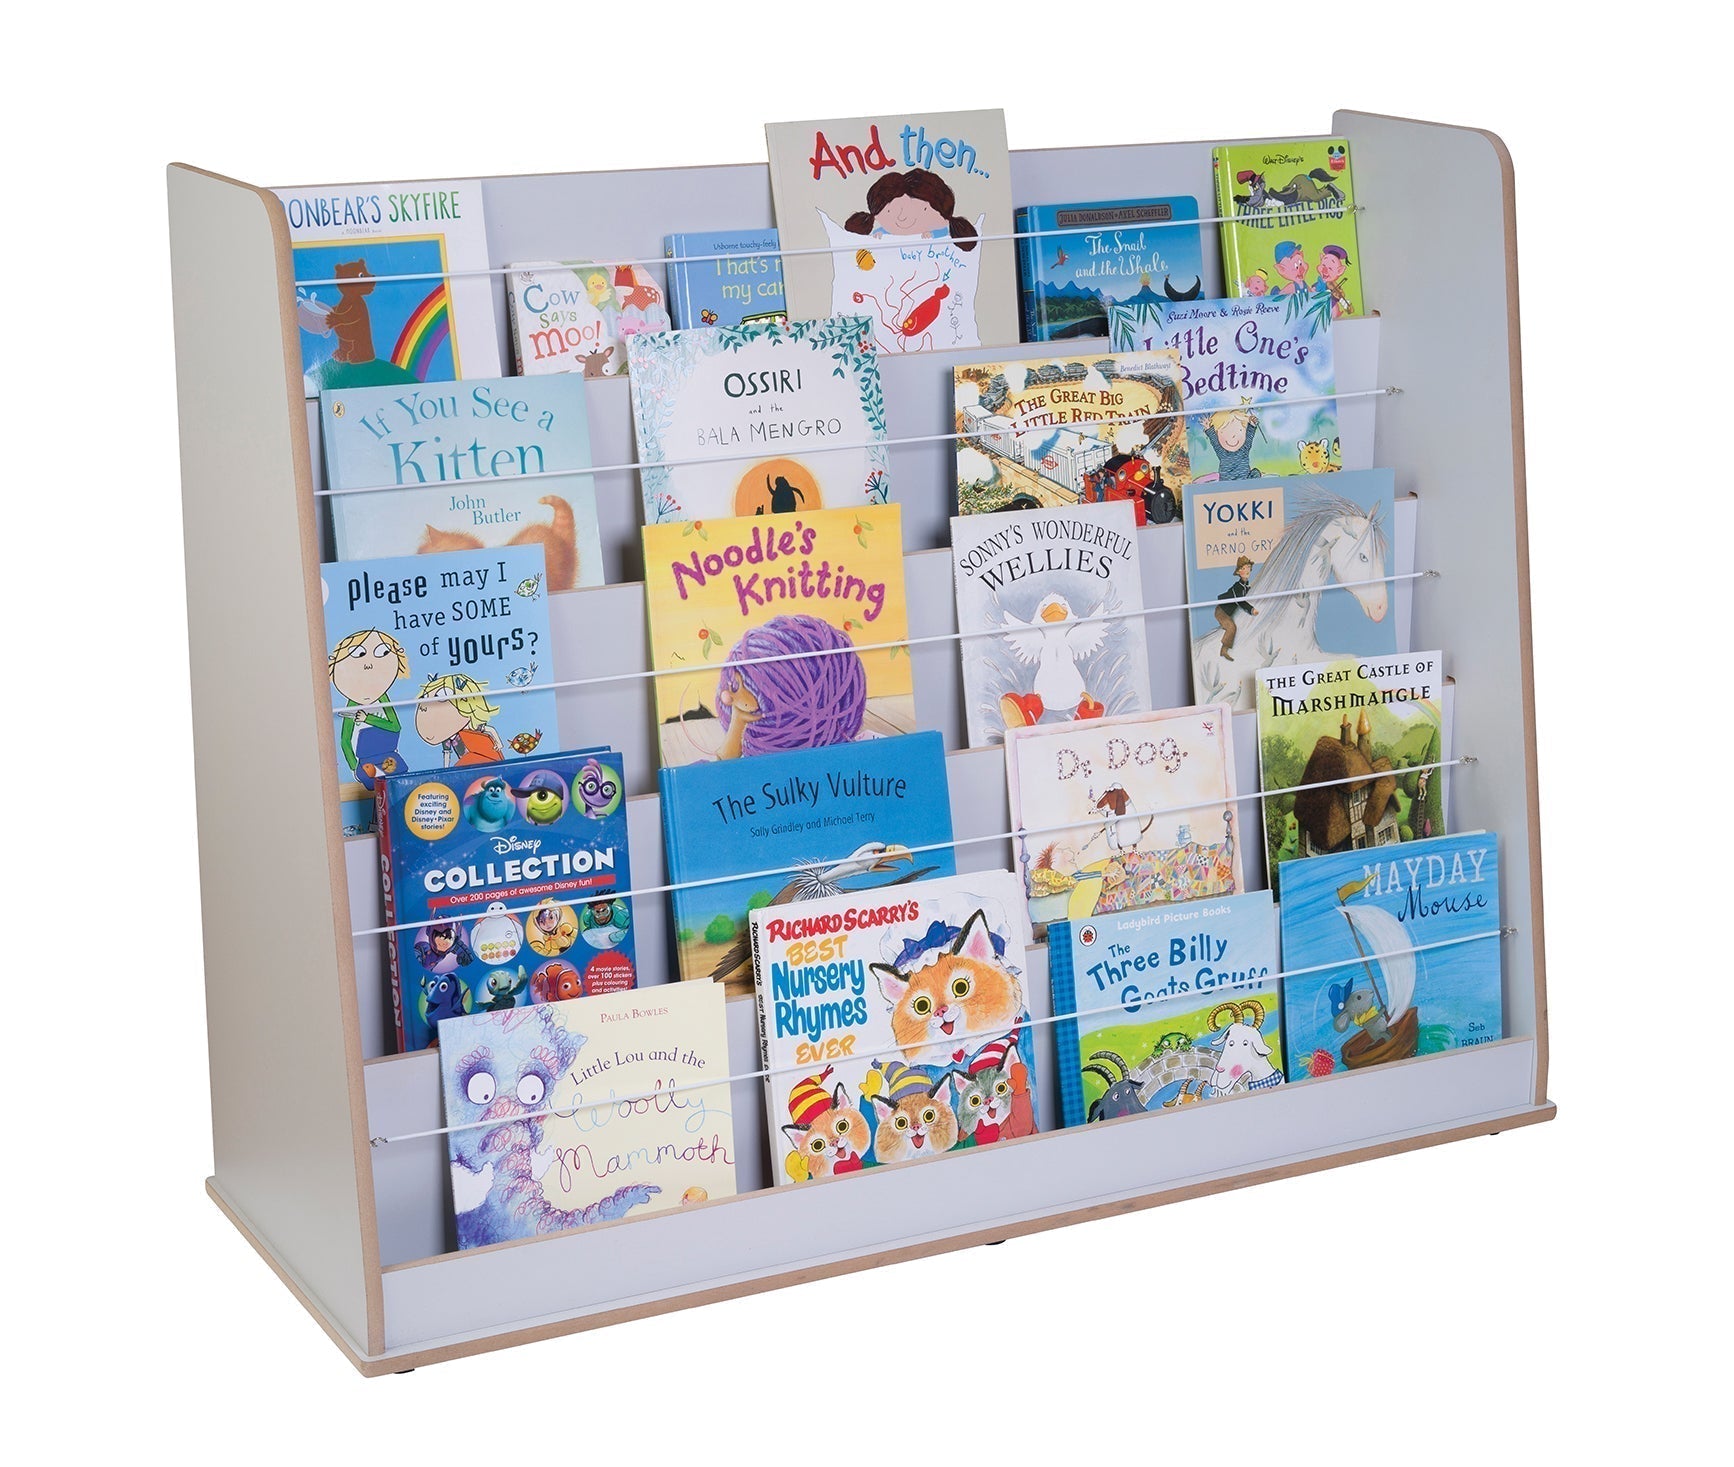 Wide Free Standing Book Display Unit, A wide anti-topple book display unit which is designed to be easily accessible and simple, yet sturdy. Great for maximising storage and displaying books the unit also features curtain wire on each shelf to keep books safe and in place. The unit can be used alone or alongside other units in the range. Wide Free Standing Book Display Unit 15mm Covered MDF – ISO 22196 certified antibacterial. Can be used alone or alongside other units in the free-standing range. Easily acc